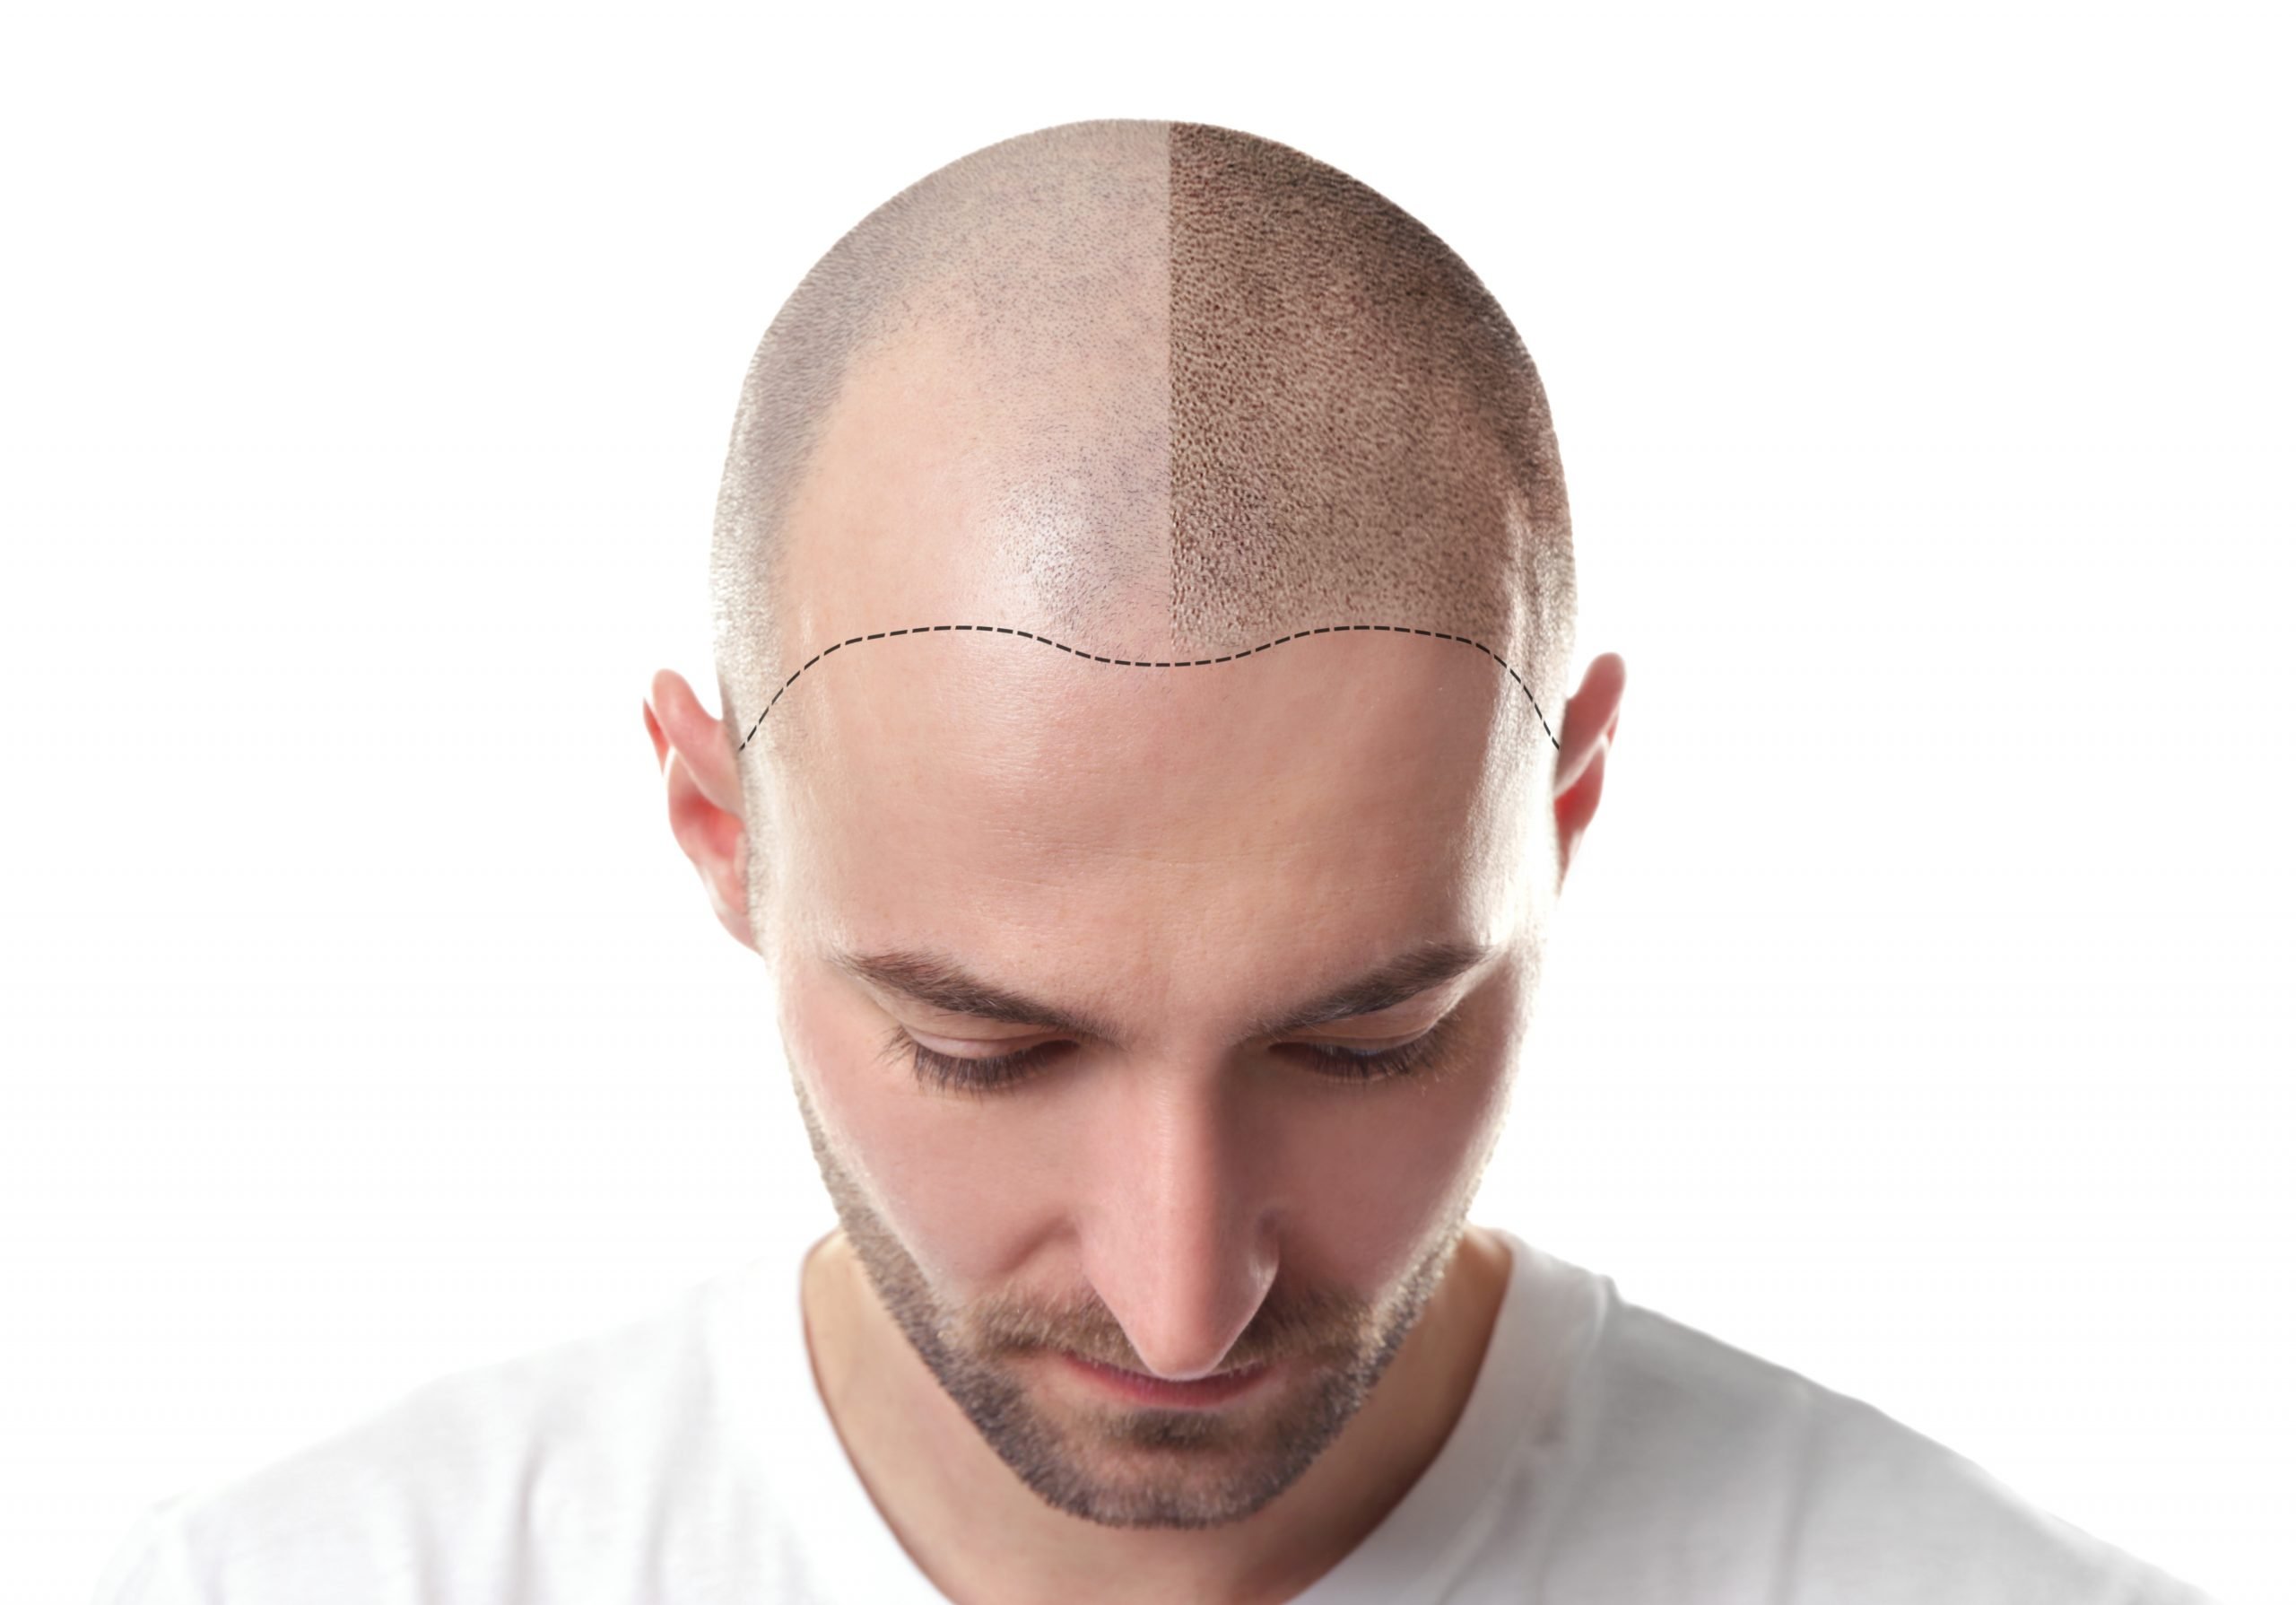 Scalp Micro-Pigmentation Is Becoming A Popular Way To Add Volume And Definition